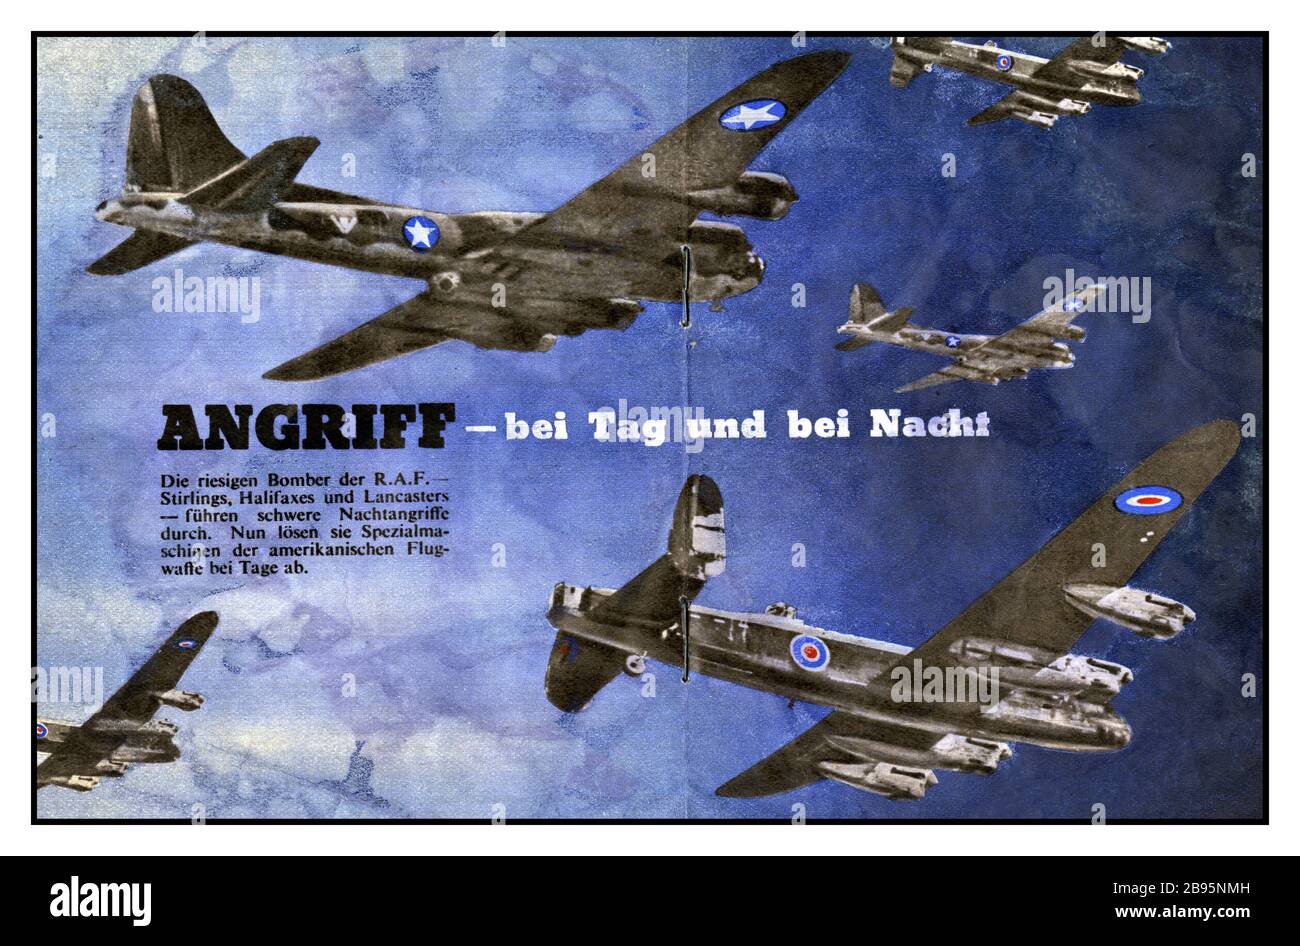 WW2 PROPAGANDA ALLIED LEAFLET DROP Nazi Germany booklet dropped by the thousands on Germany. It reads: “Attack—by Day and by Night. The bombers of the RAF—Stirlings, Halifaxes and Lancasters—carry out heavy night operations. Now using bombers of American air force by day.”  In the summer of 1943, the daytime American and nighttime British bombing campaigns became aligned as the “Combined Bomber Offensive.”  This plan established 24hr bombing of the enemy. Until D-Day 1944, the priority targets were Germany’s fighters and its ball-bearing and oil industries ANGRIFF-bei Tag und bei Nacht Stock Photo